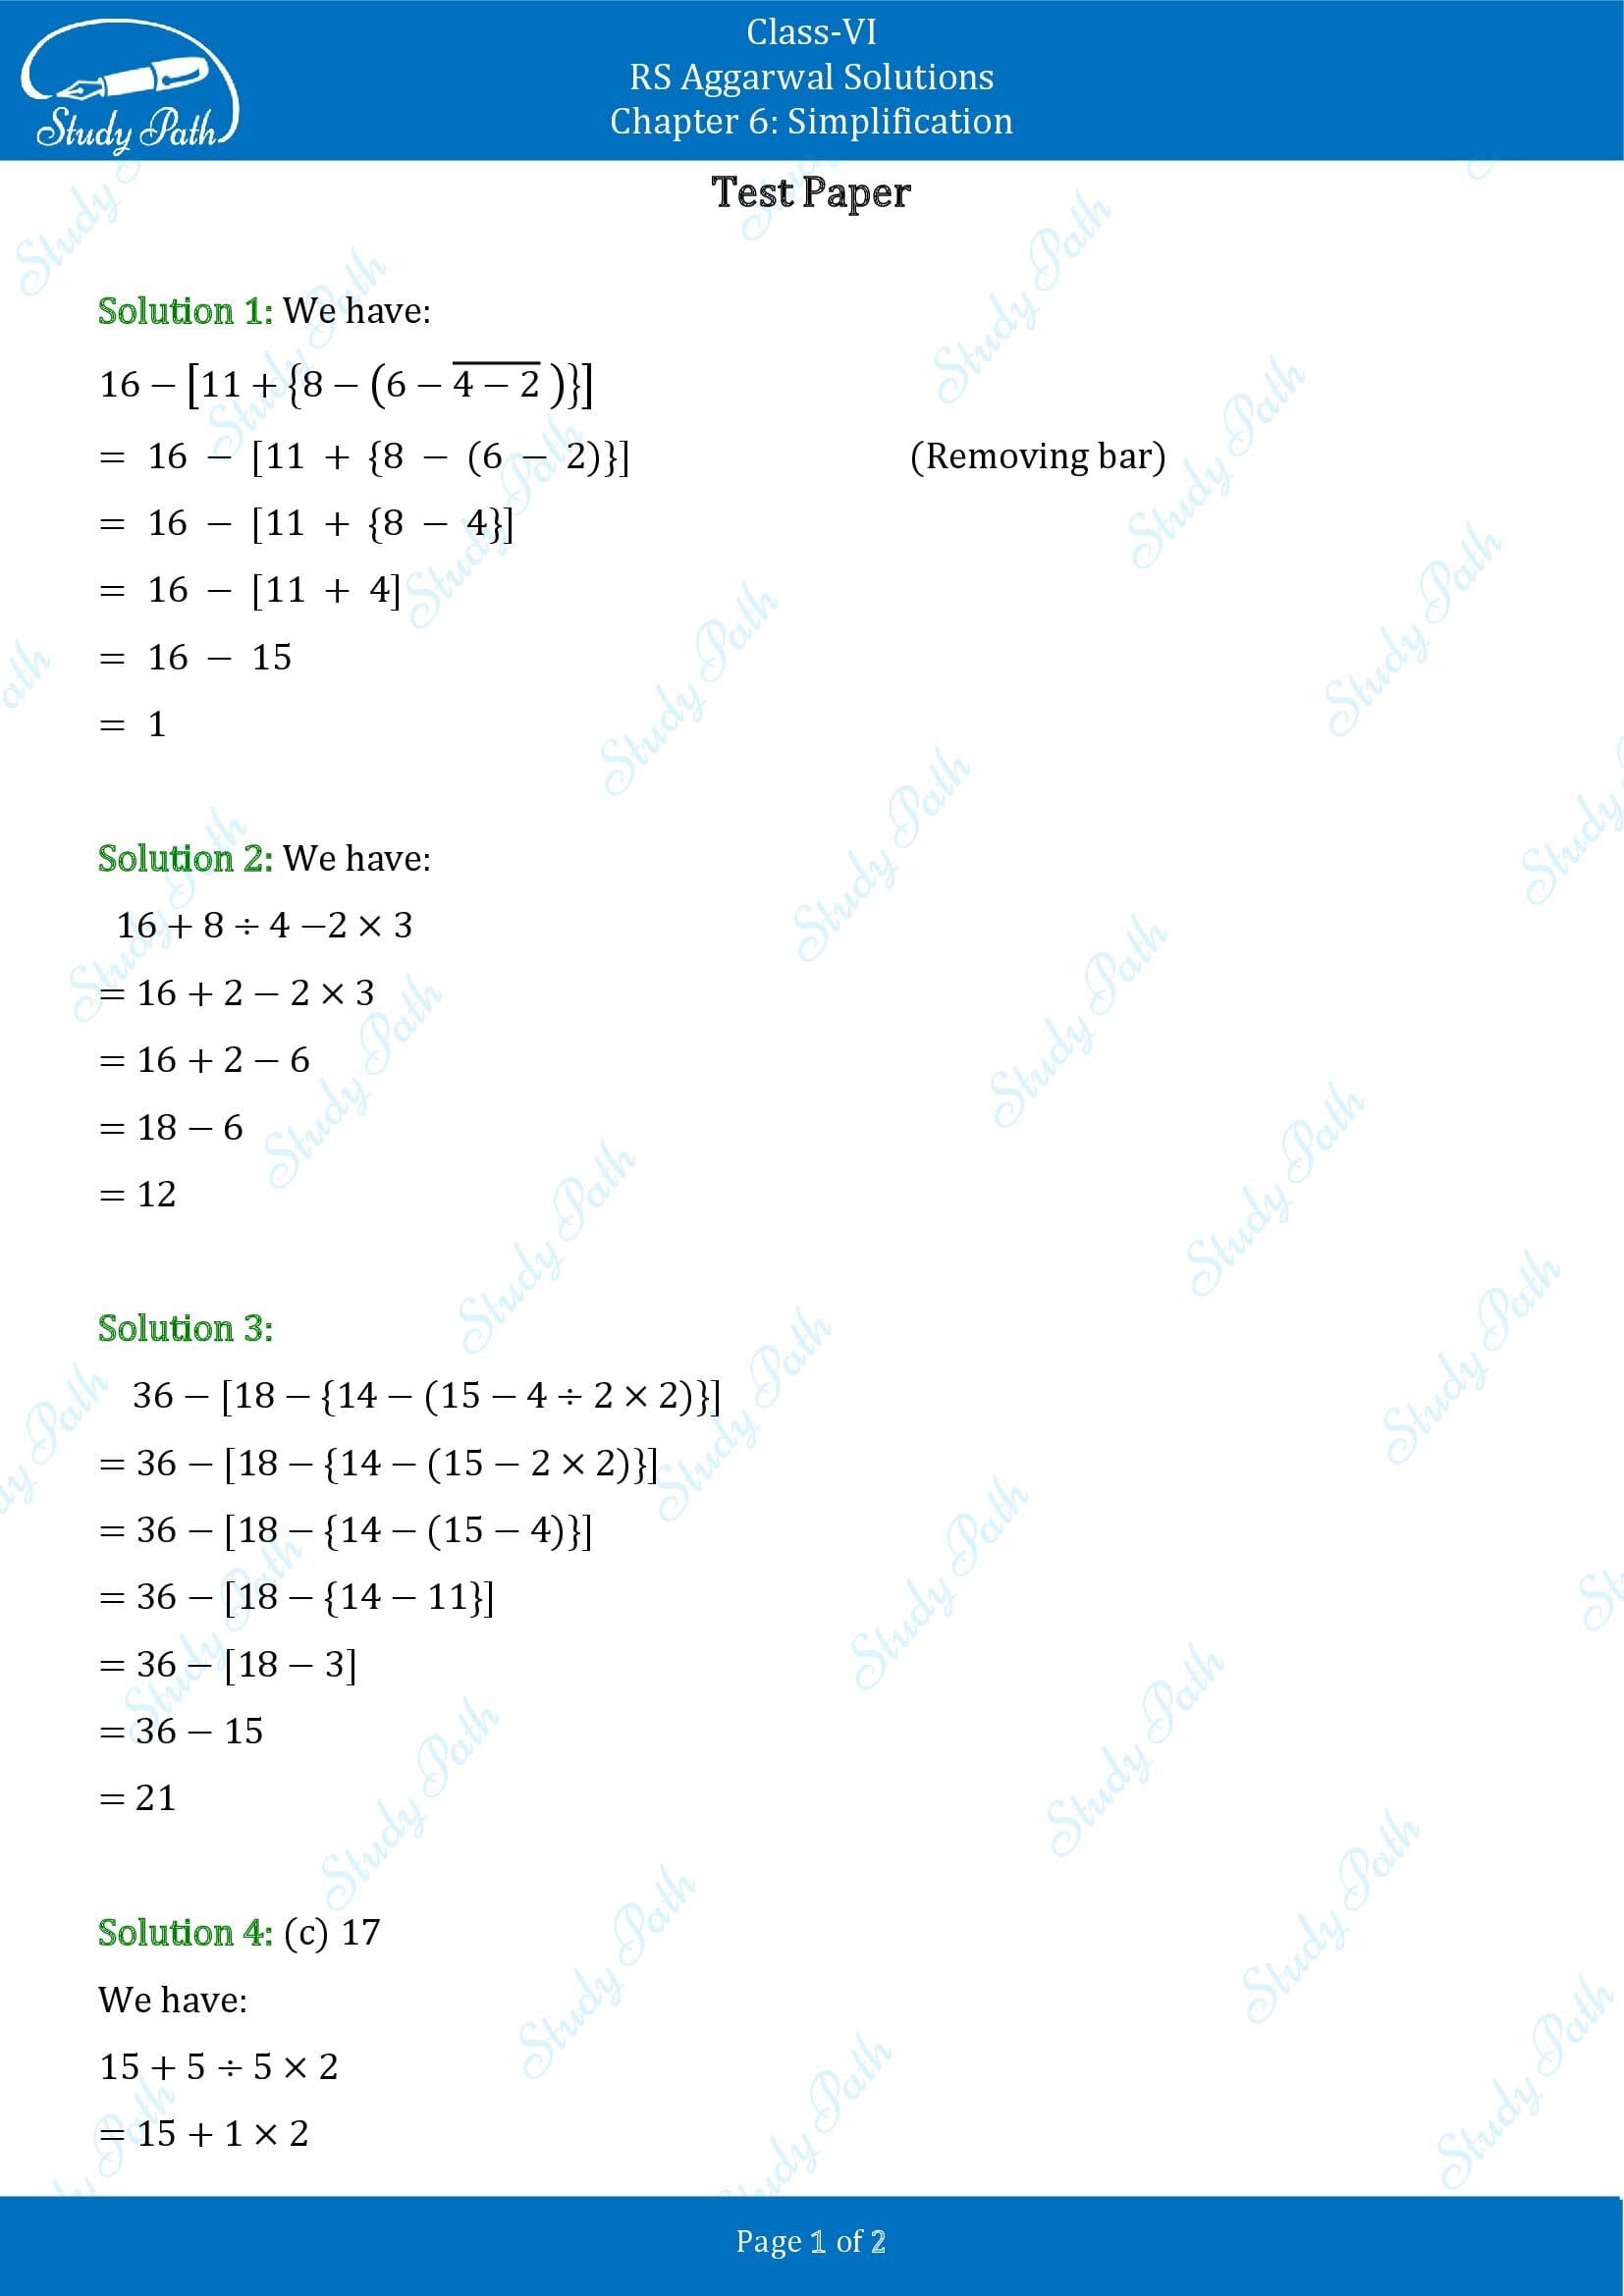 RS Aggarwal Solutions Class 6 Chapter 6 Simplification Test Paper 0001